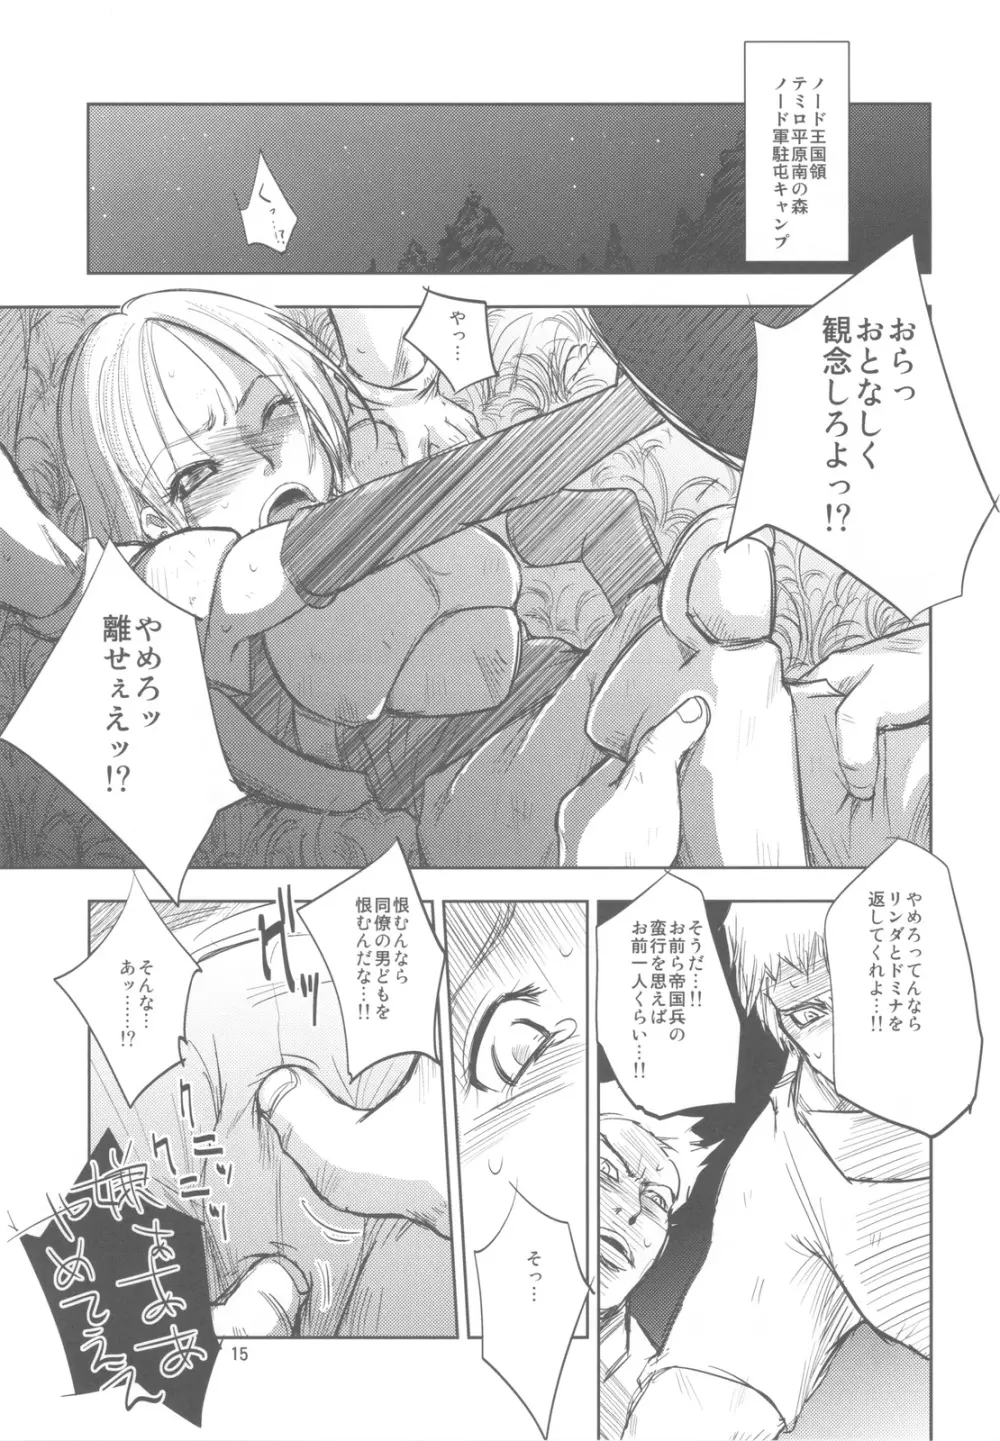 GRASSEN'S WAR ANOTHER STORY Ex #01 ノード侵攻 I Page.14